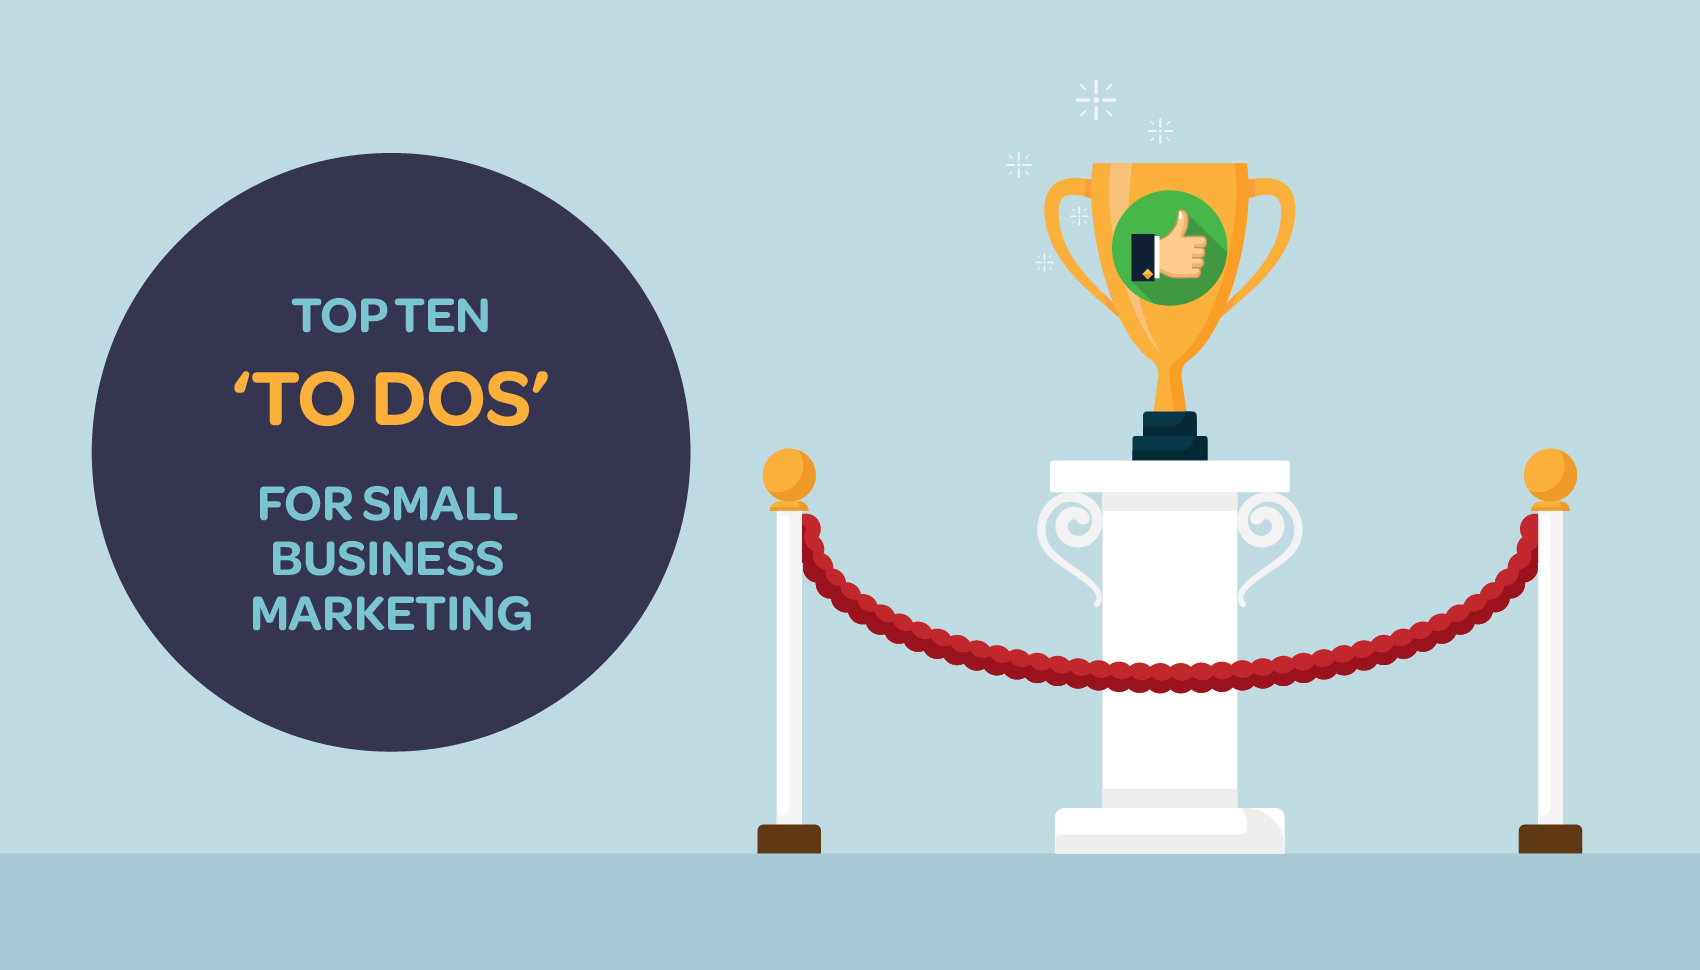 Top 10 ‘To Dos’ for small business marketing